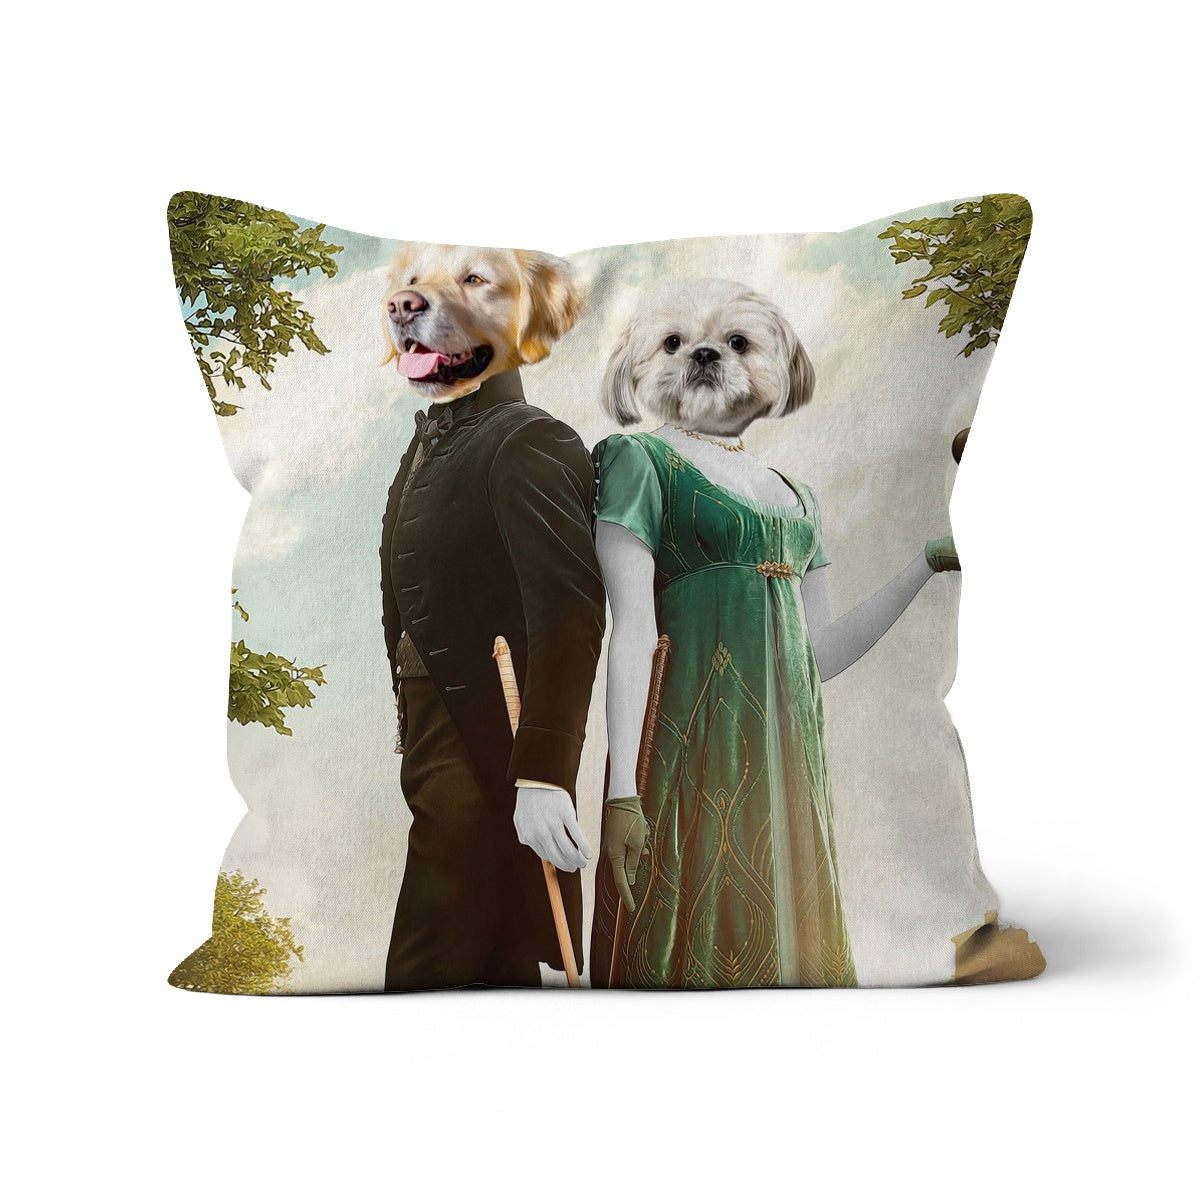 Kate & Anthony (Bridgerton Inspired): Custom Pet Cushion, Paw & Glory, paw and glory, pillows of your dog, pet face pillow, pet custom pillow, pet print pillow, dog photo on pillow